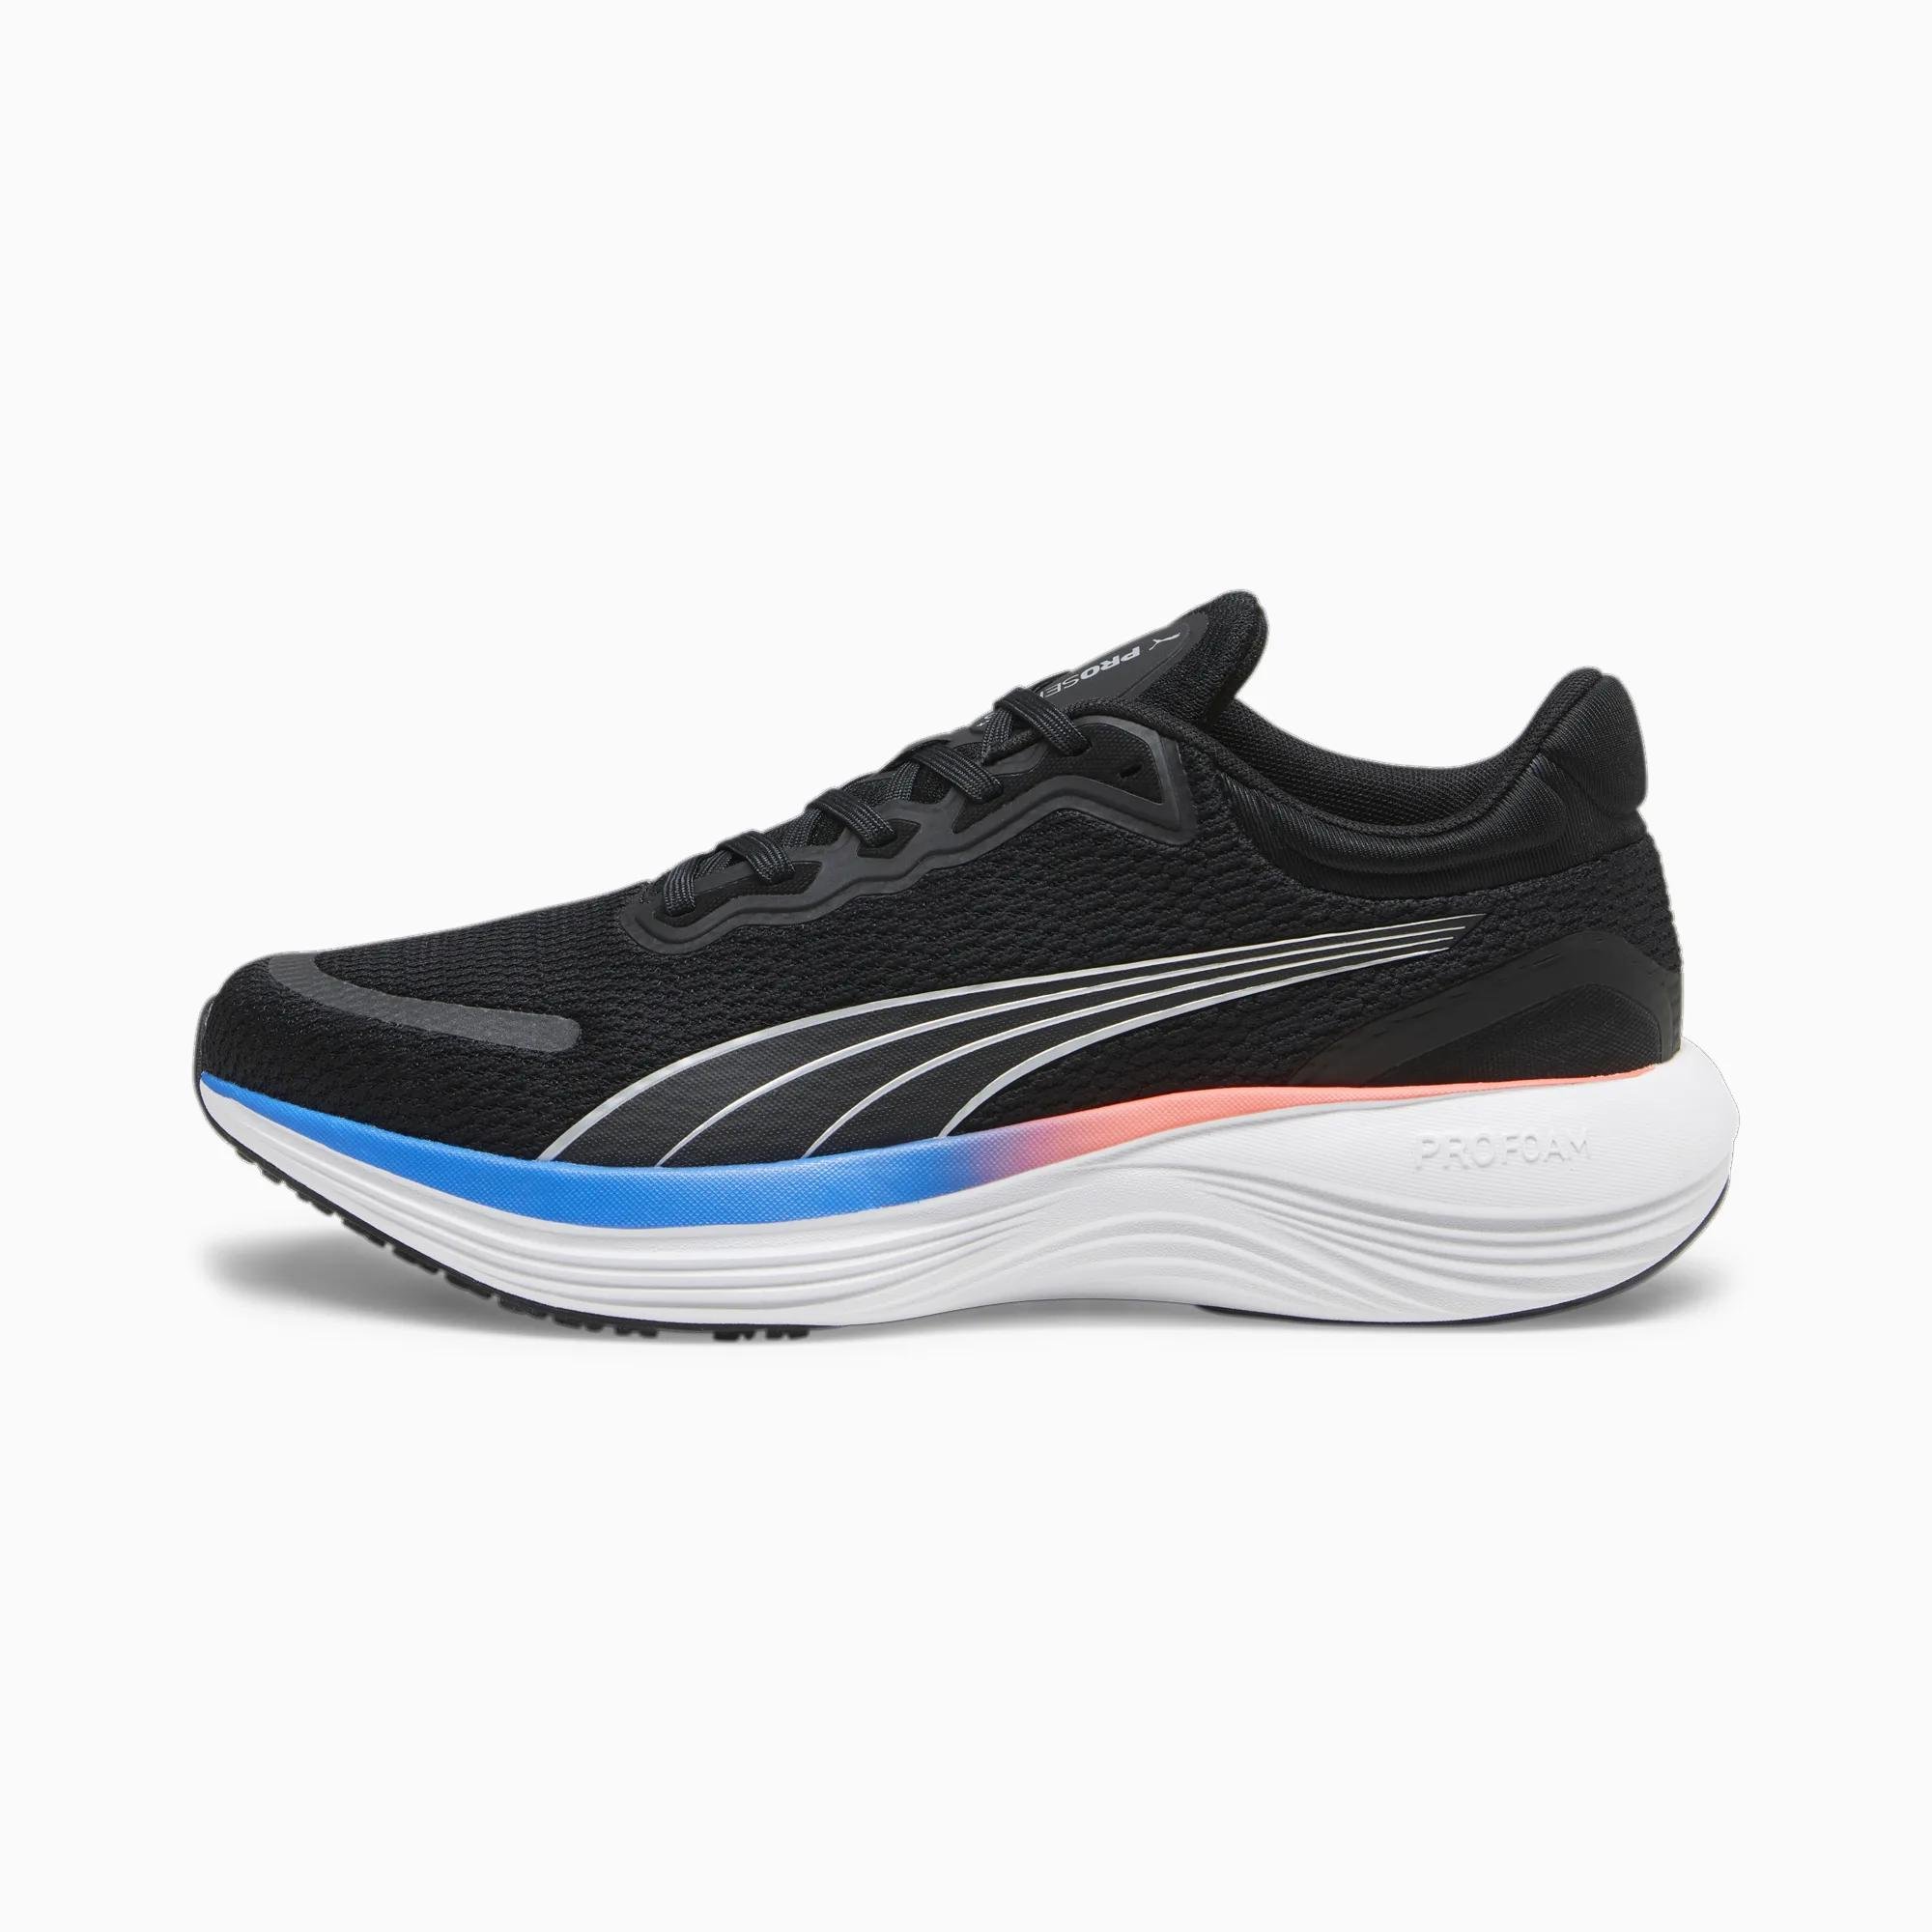 Scend Pro Men's Running Shoes by PUMA